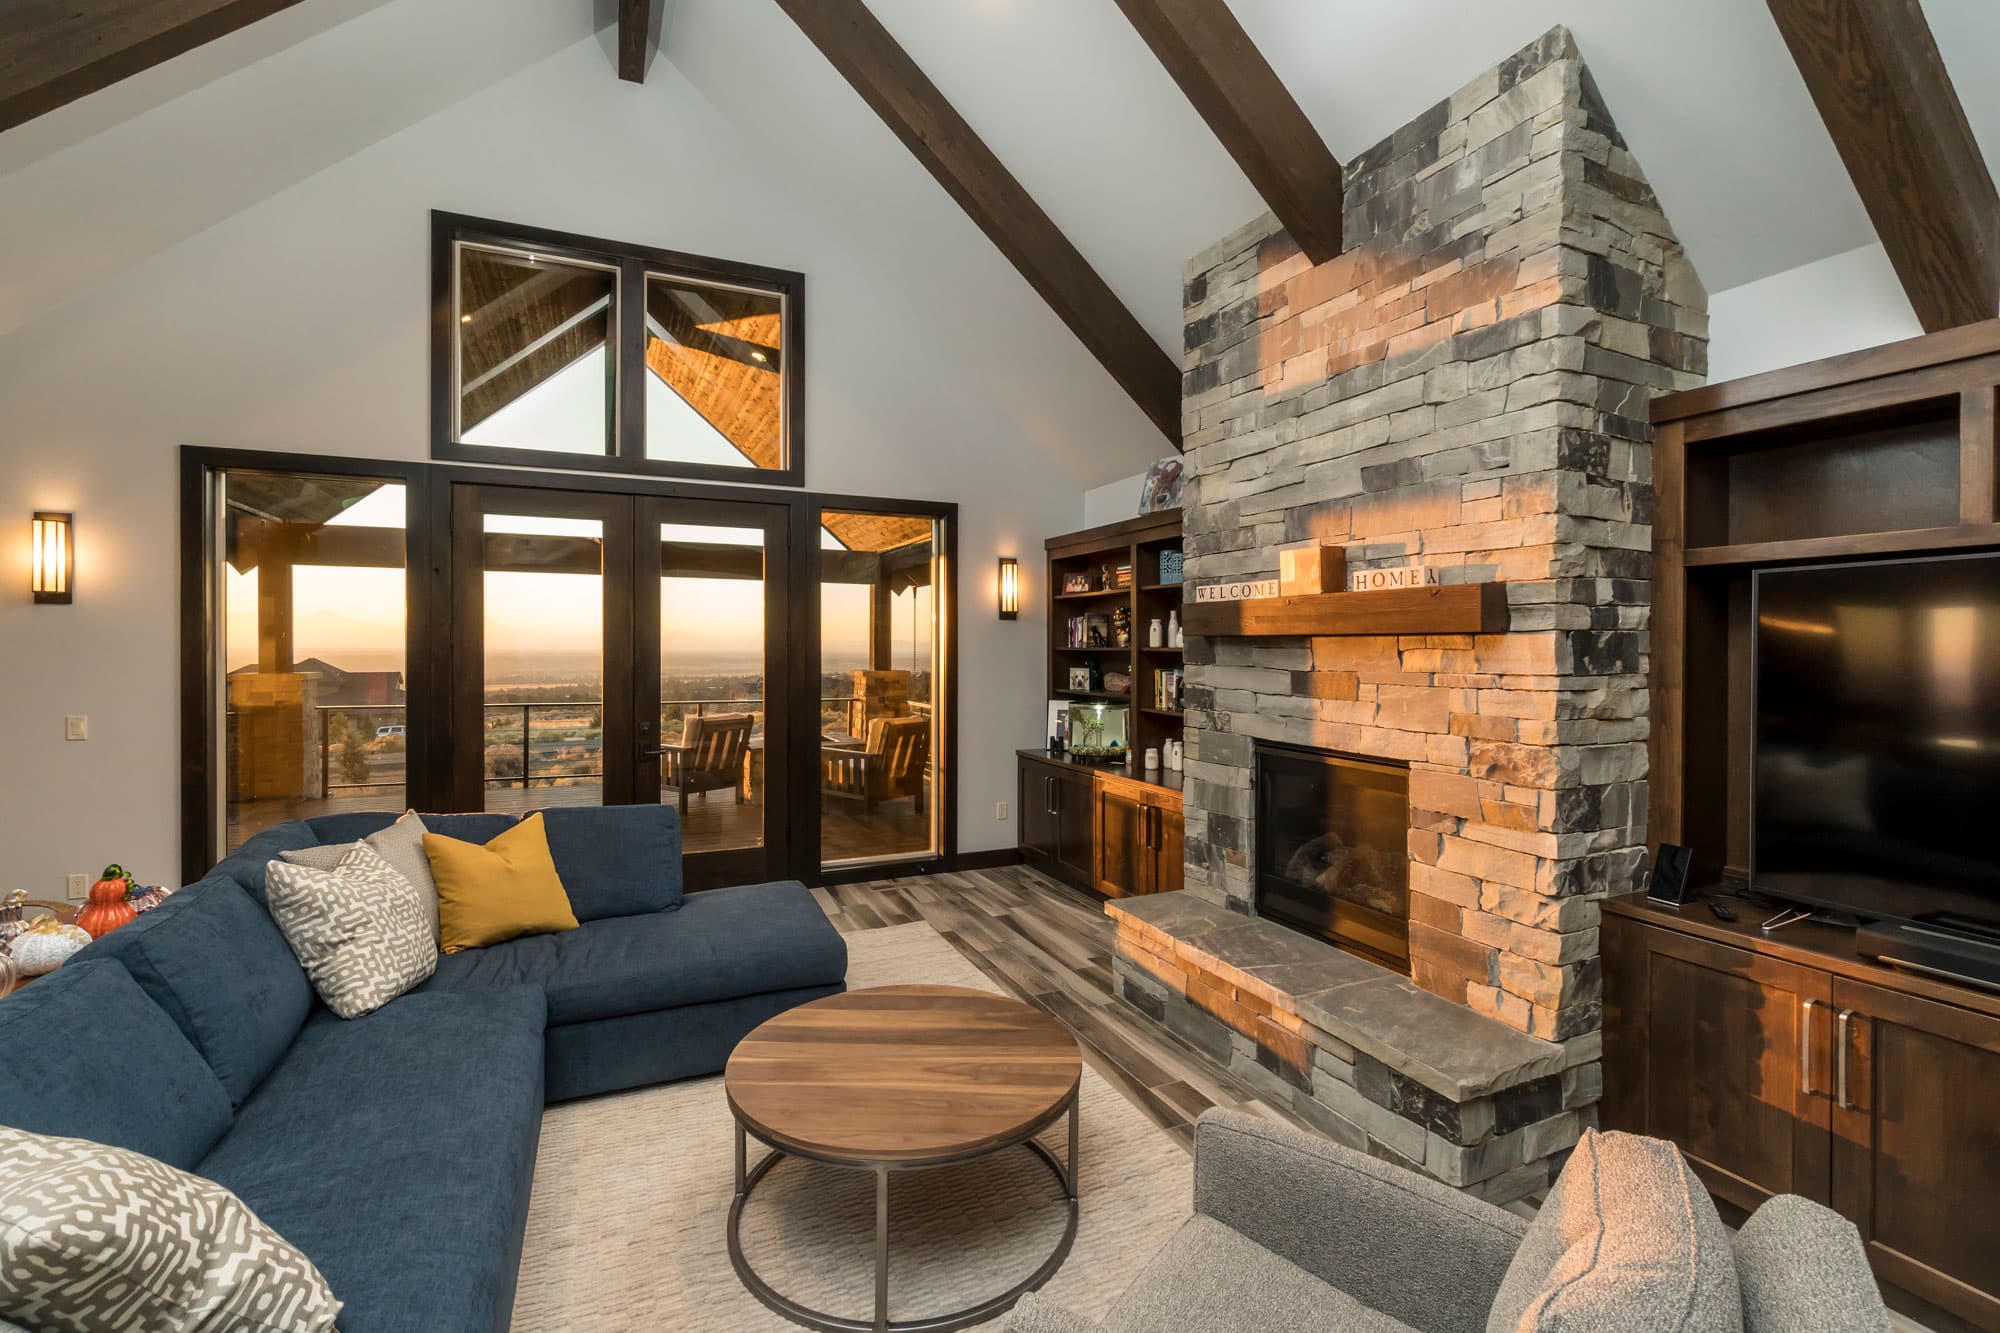 Large living room with a stone fireplace. Open windows with the sun setting outside